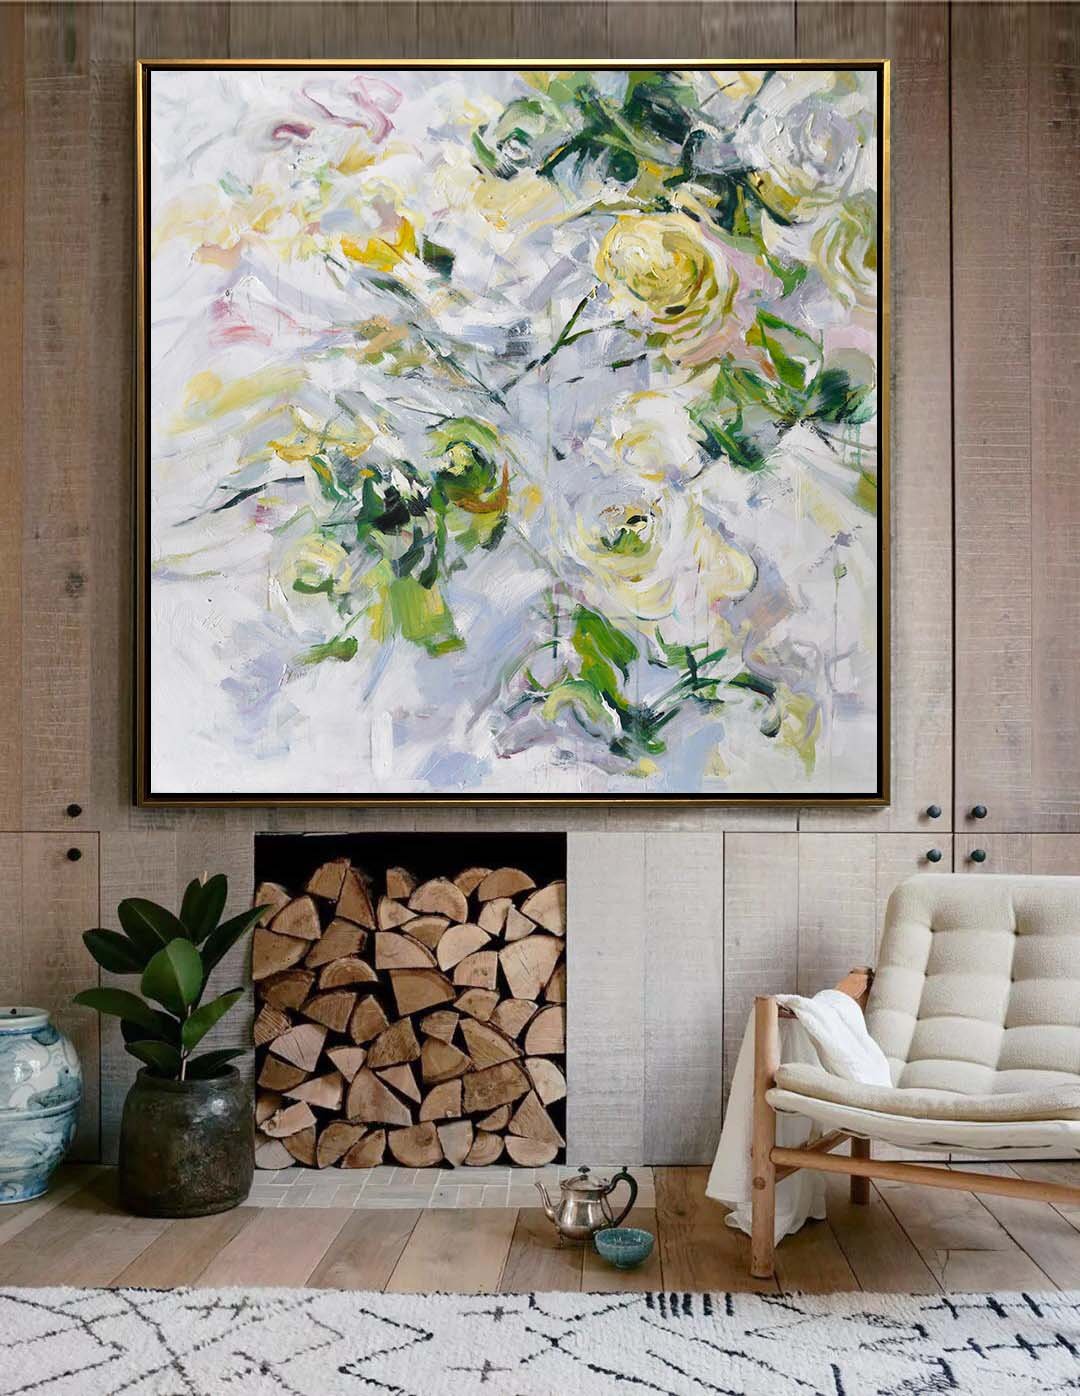 Large Abstract Art Handmade Painting,Oversized Abstract Flower Oil Painting,Handmade Acrylic Painting